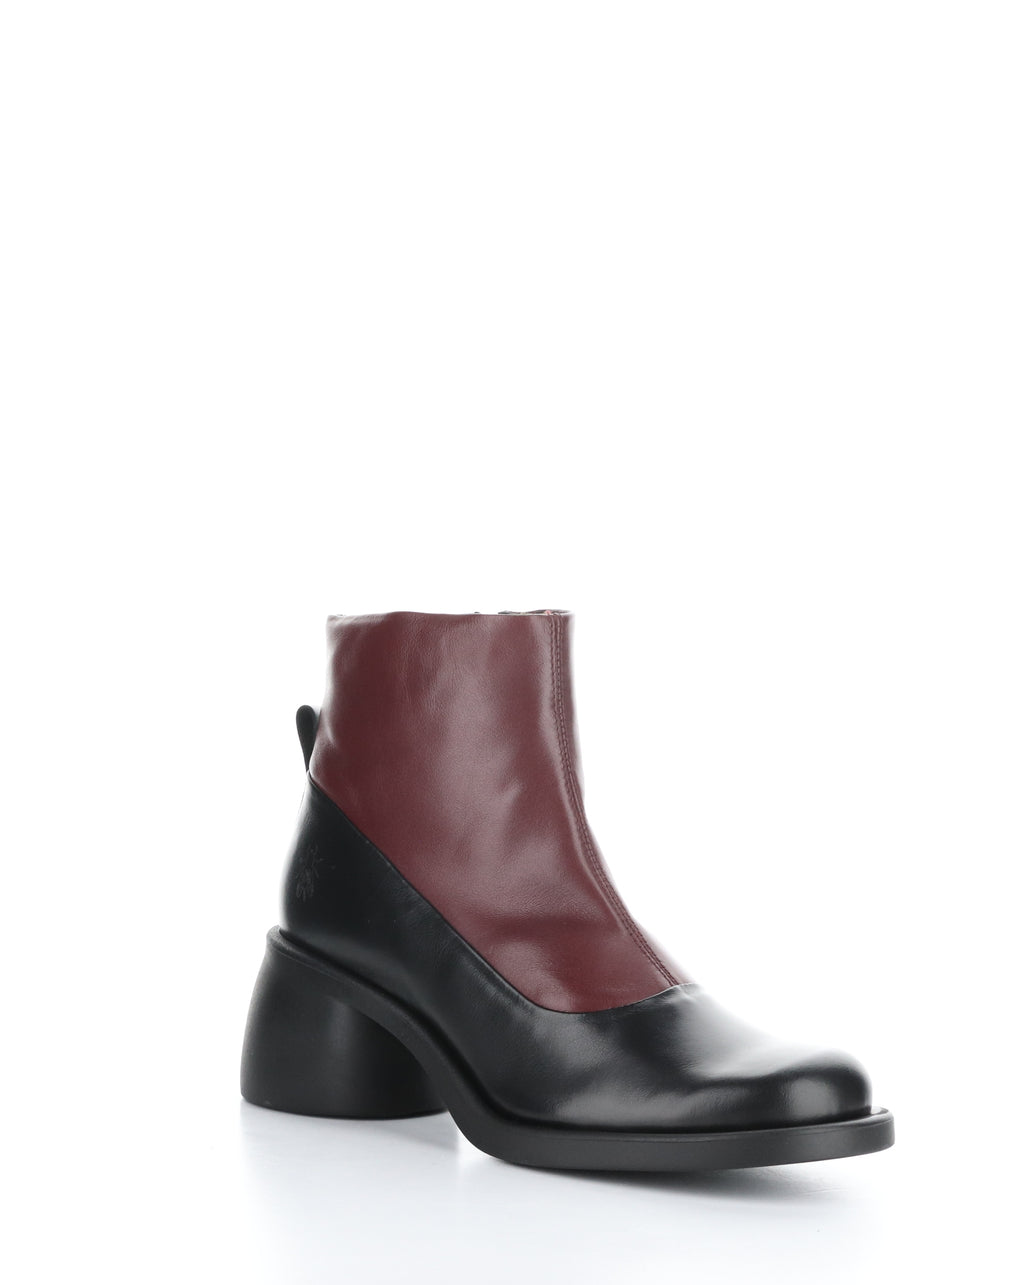 Fly London "Hint" Black/Wine - Ankle Boot